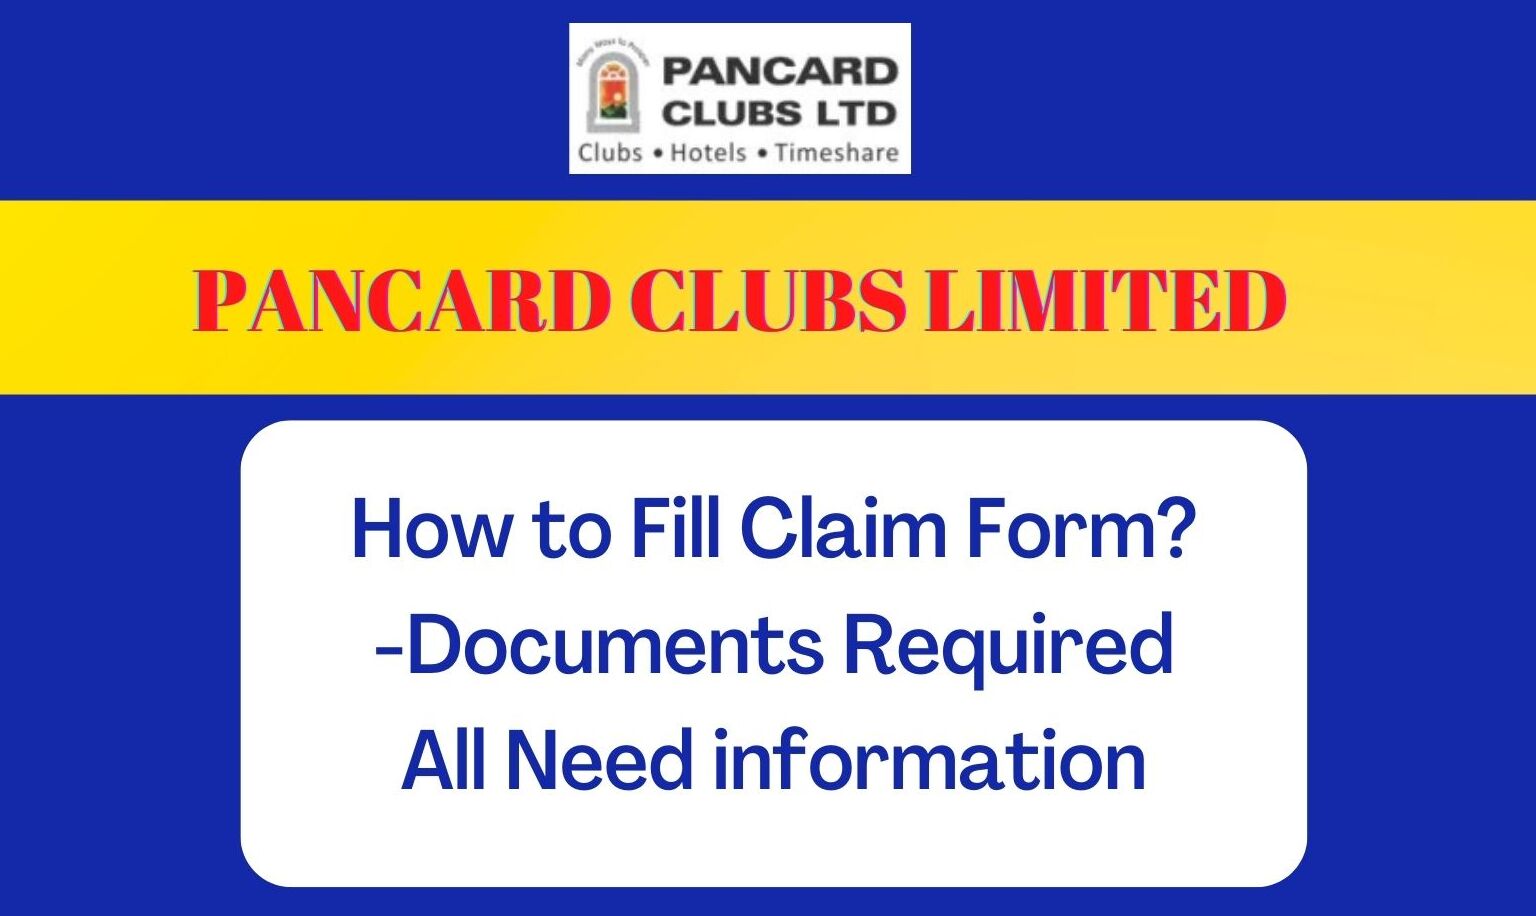 Pancard-Clubs-Limited